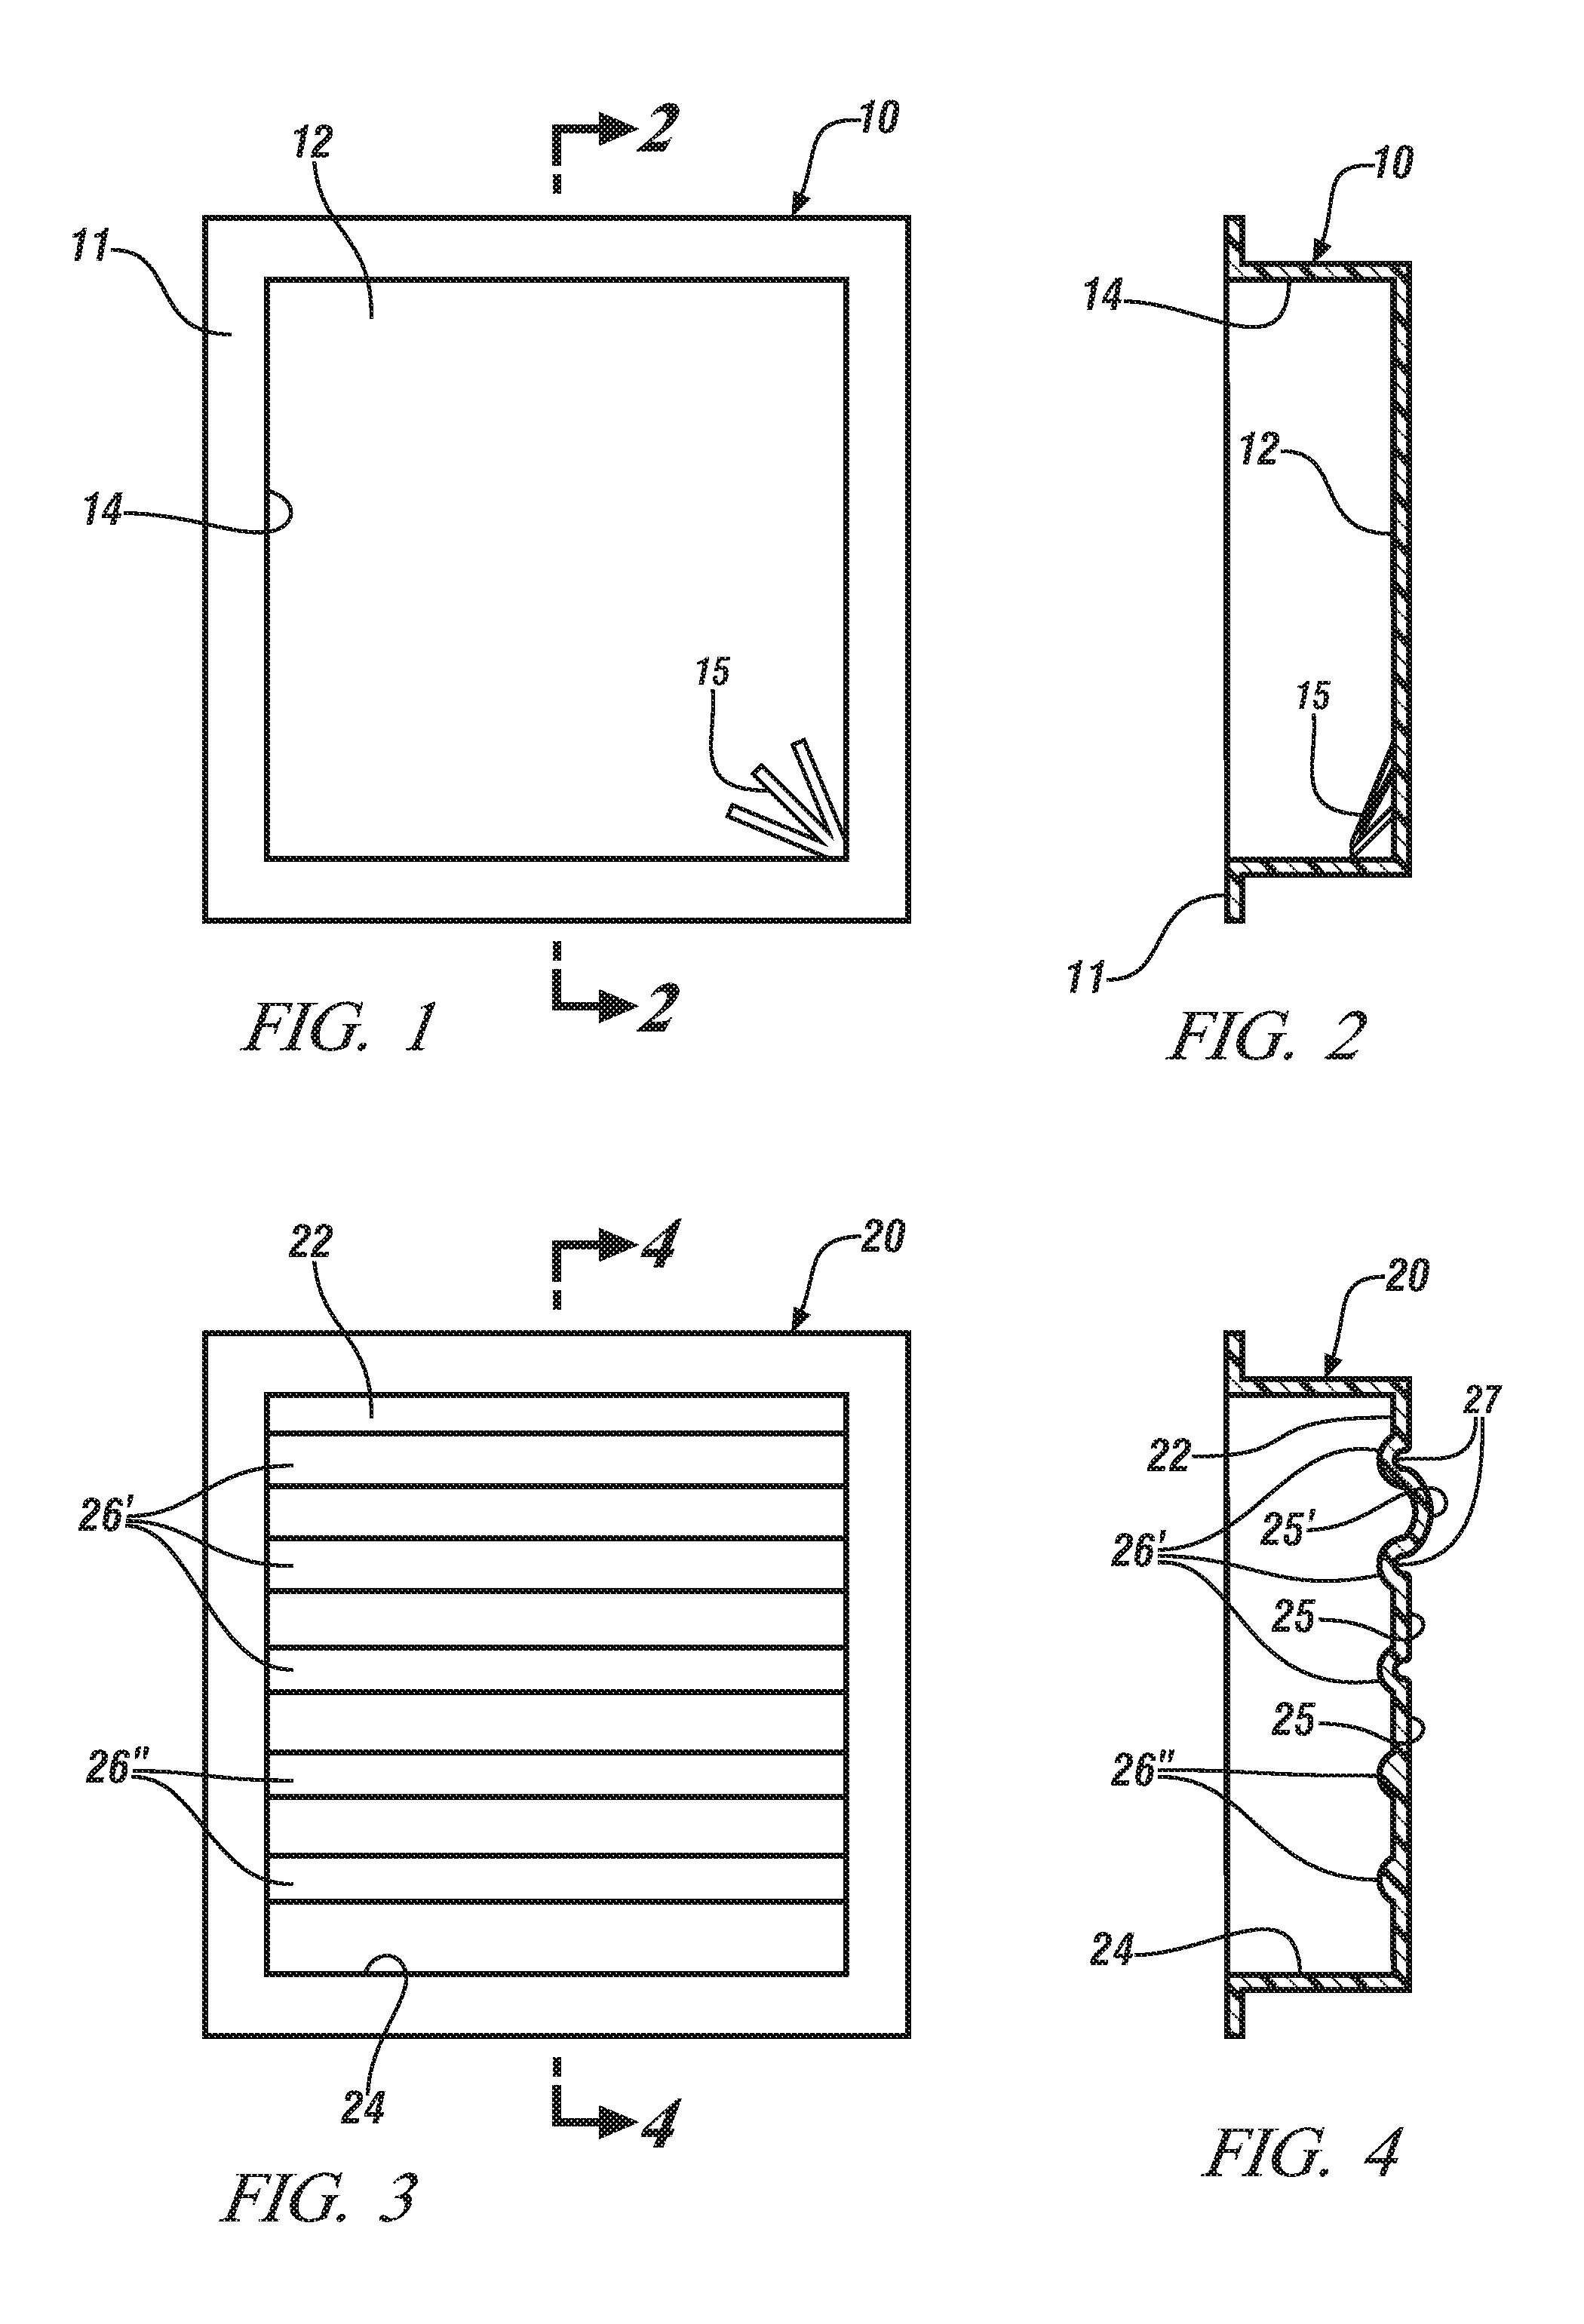 Fabric composite support or enclosure for an automotive battery pack